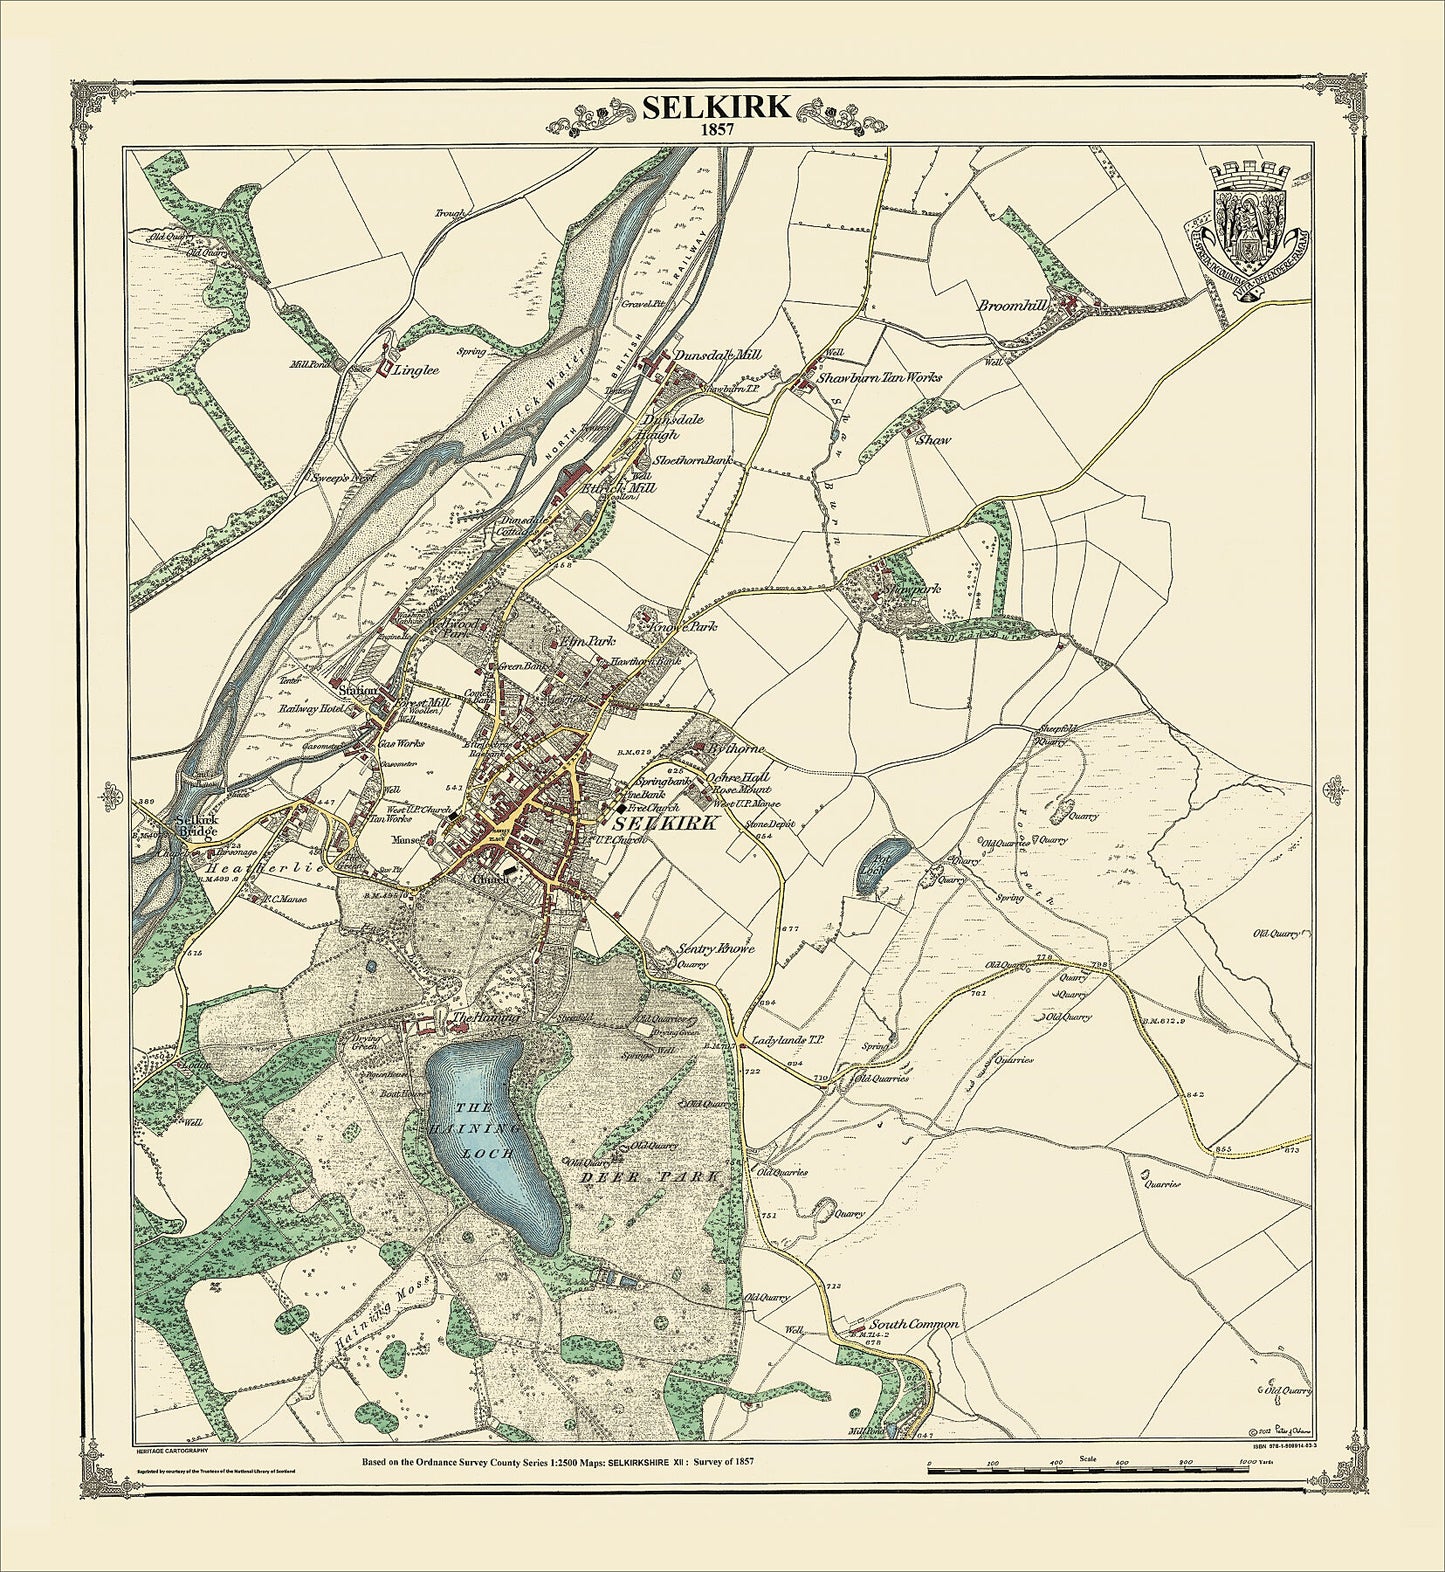 Coloured Victorian map of Selkirk in 1857 by Peter J Adams of Heritage Cartography